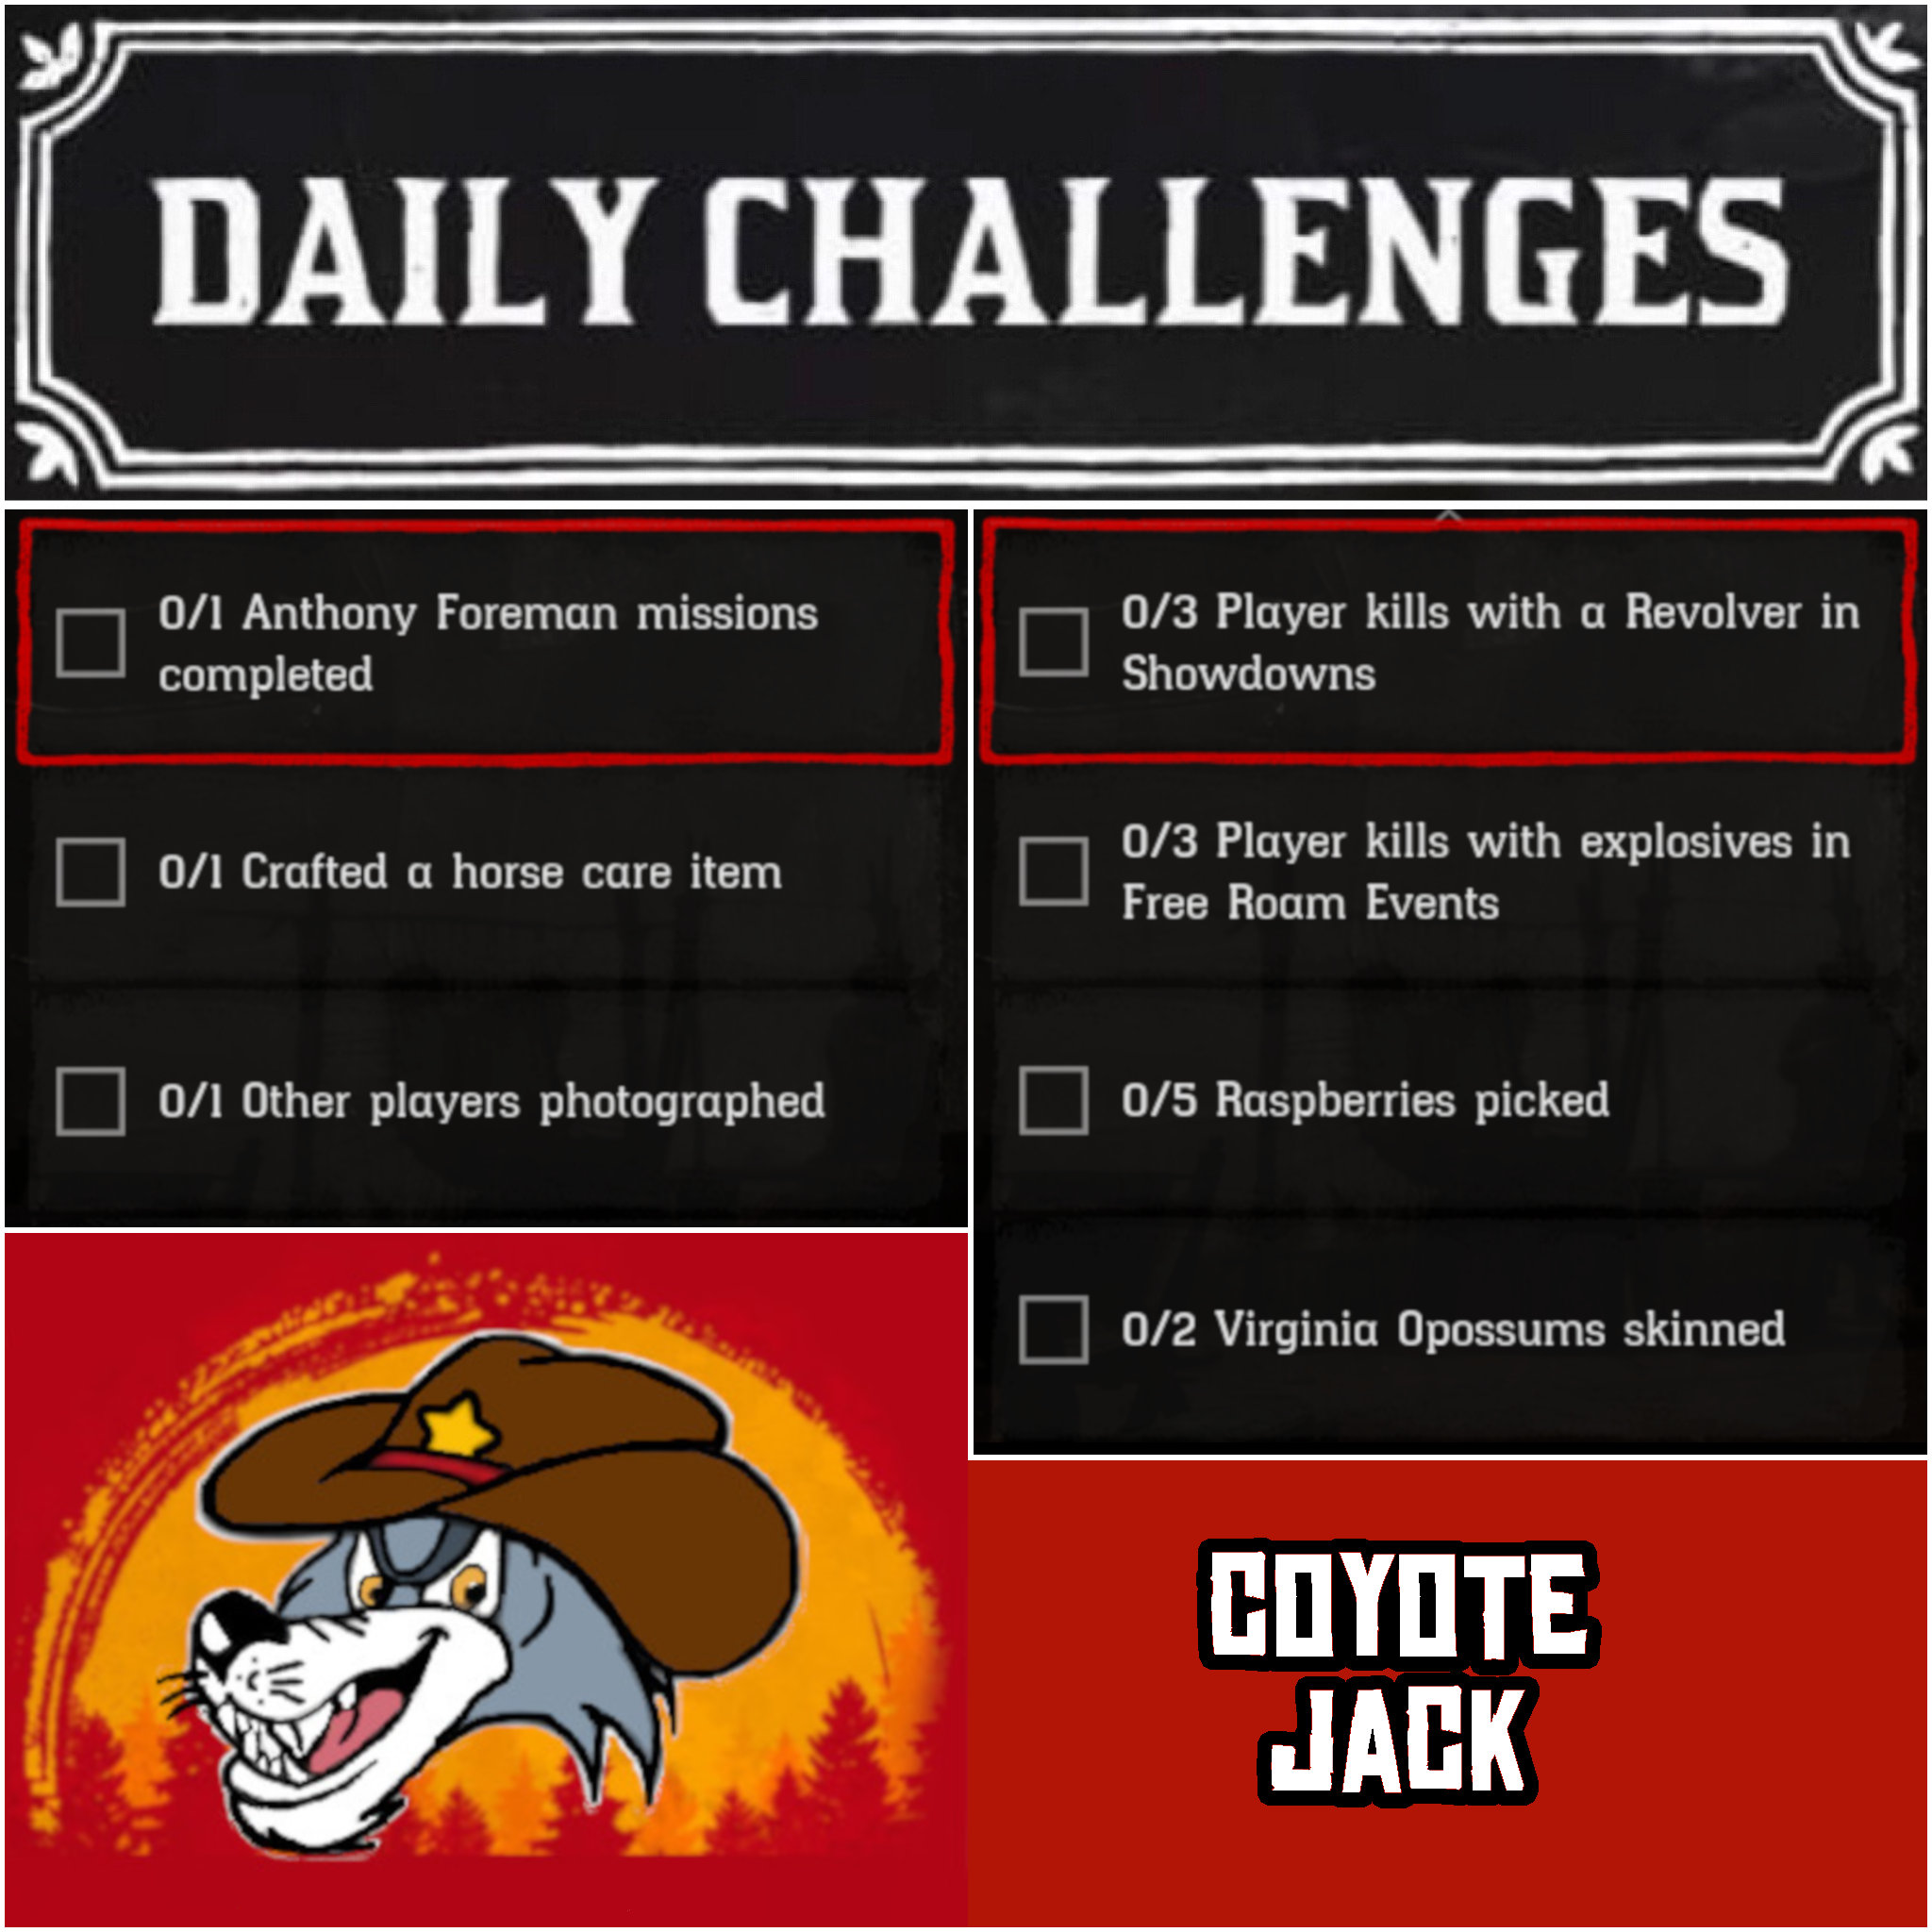 You are currently viewing Wednesday 03 March Daily Challenges